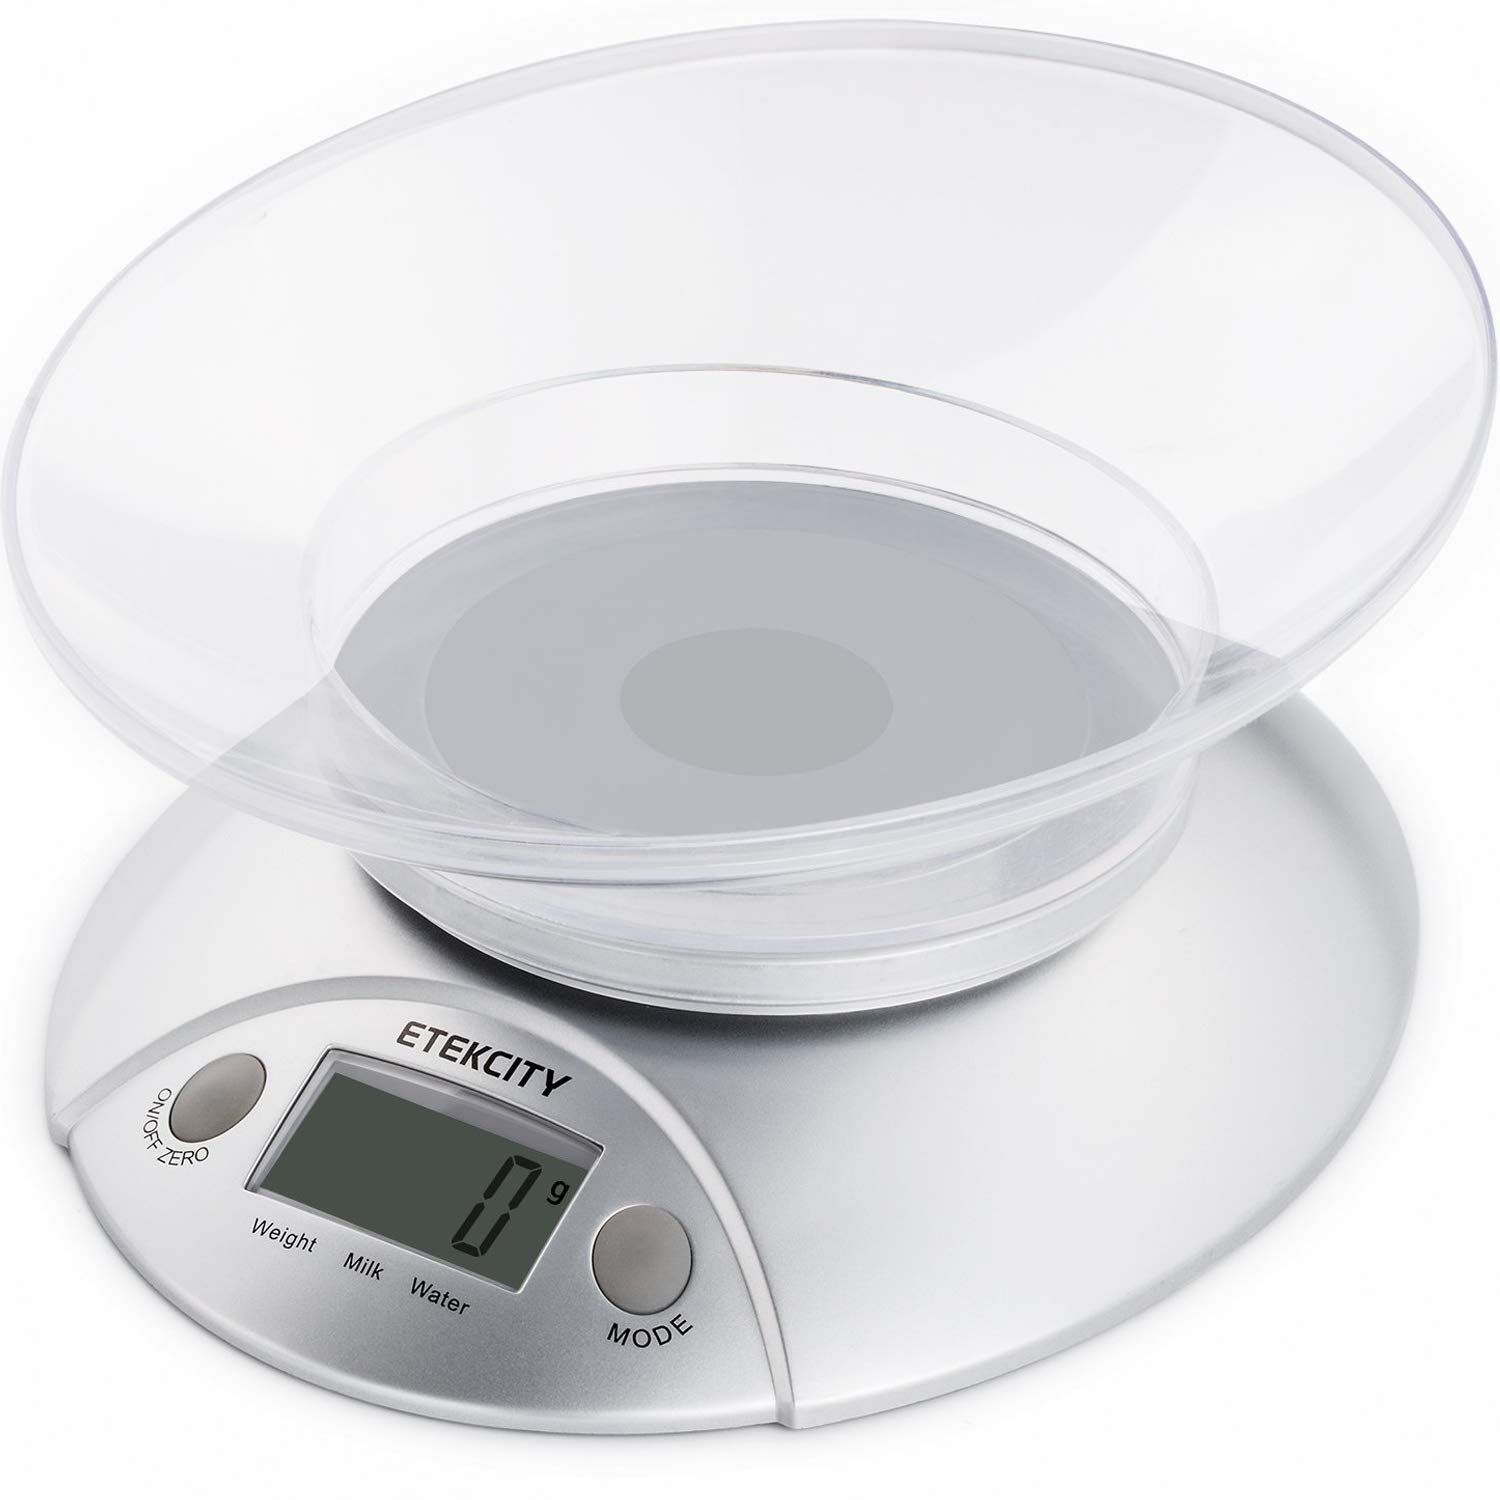 Etekcity Digital Kitchen Food Scale and Multifunction Weight Scale